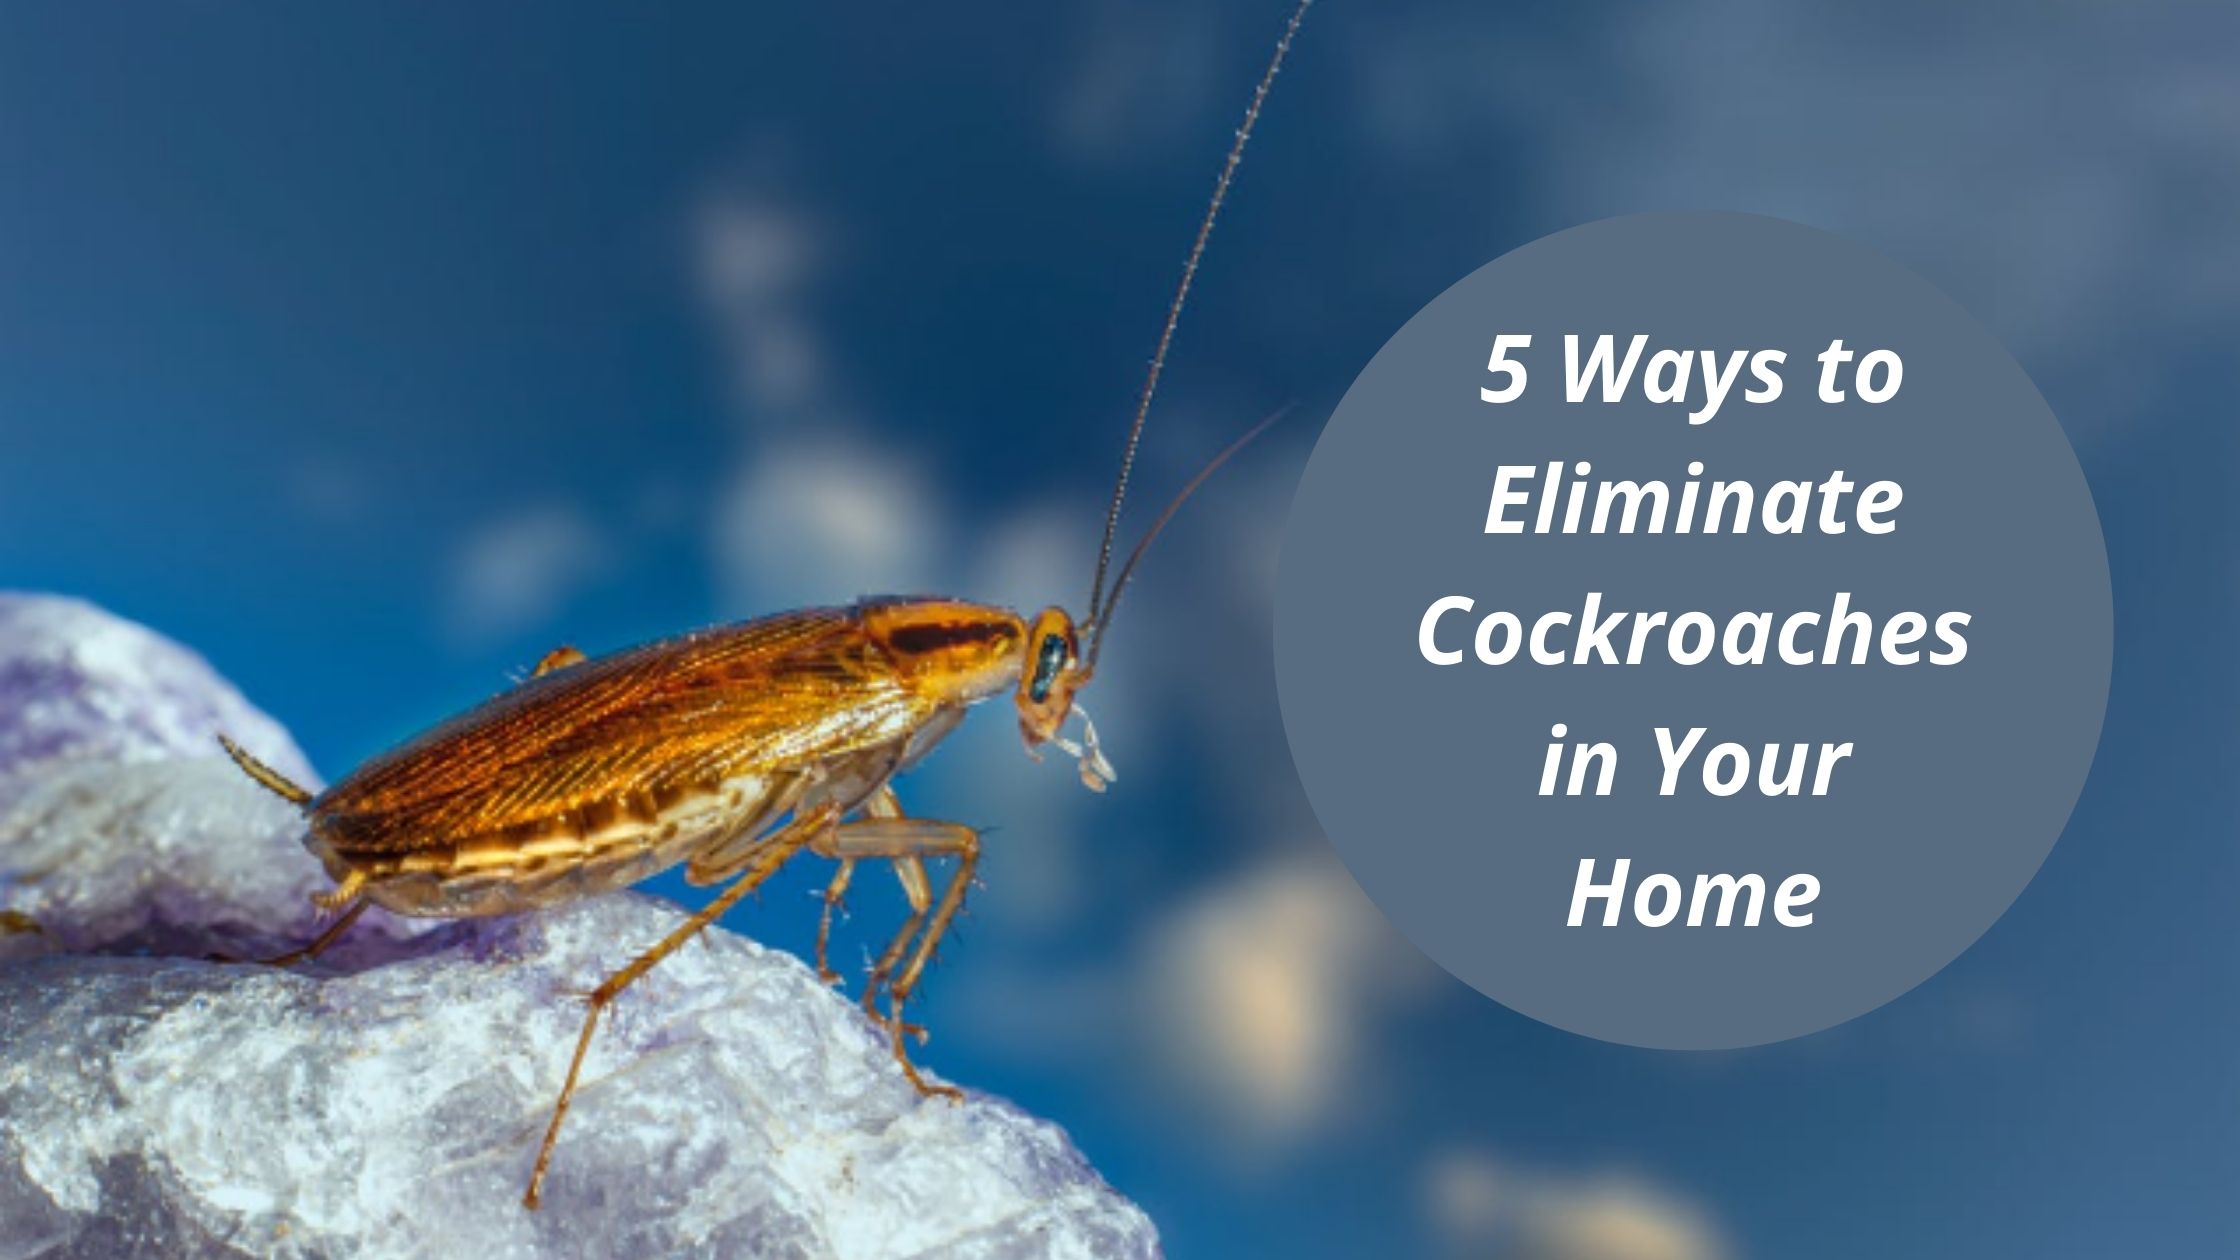 5 Ways to Eliminate Cockroaches in Your Home